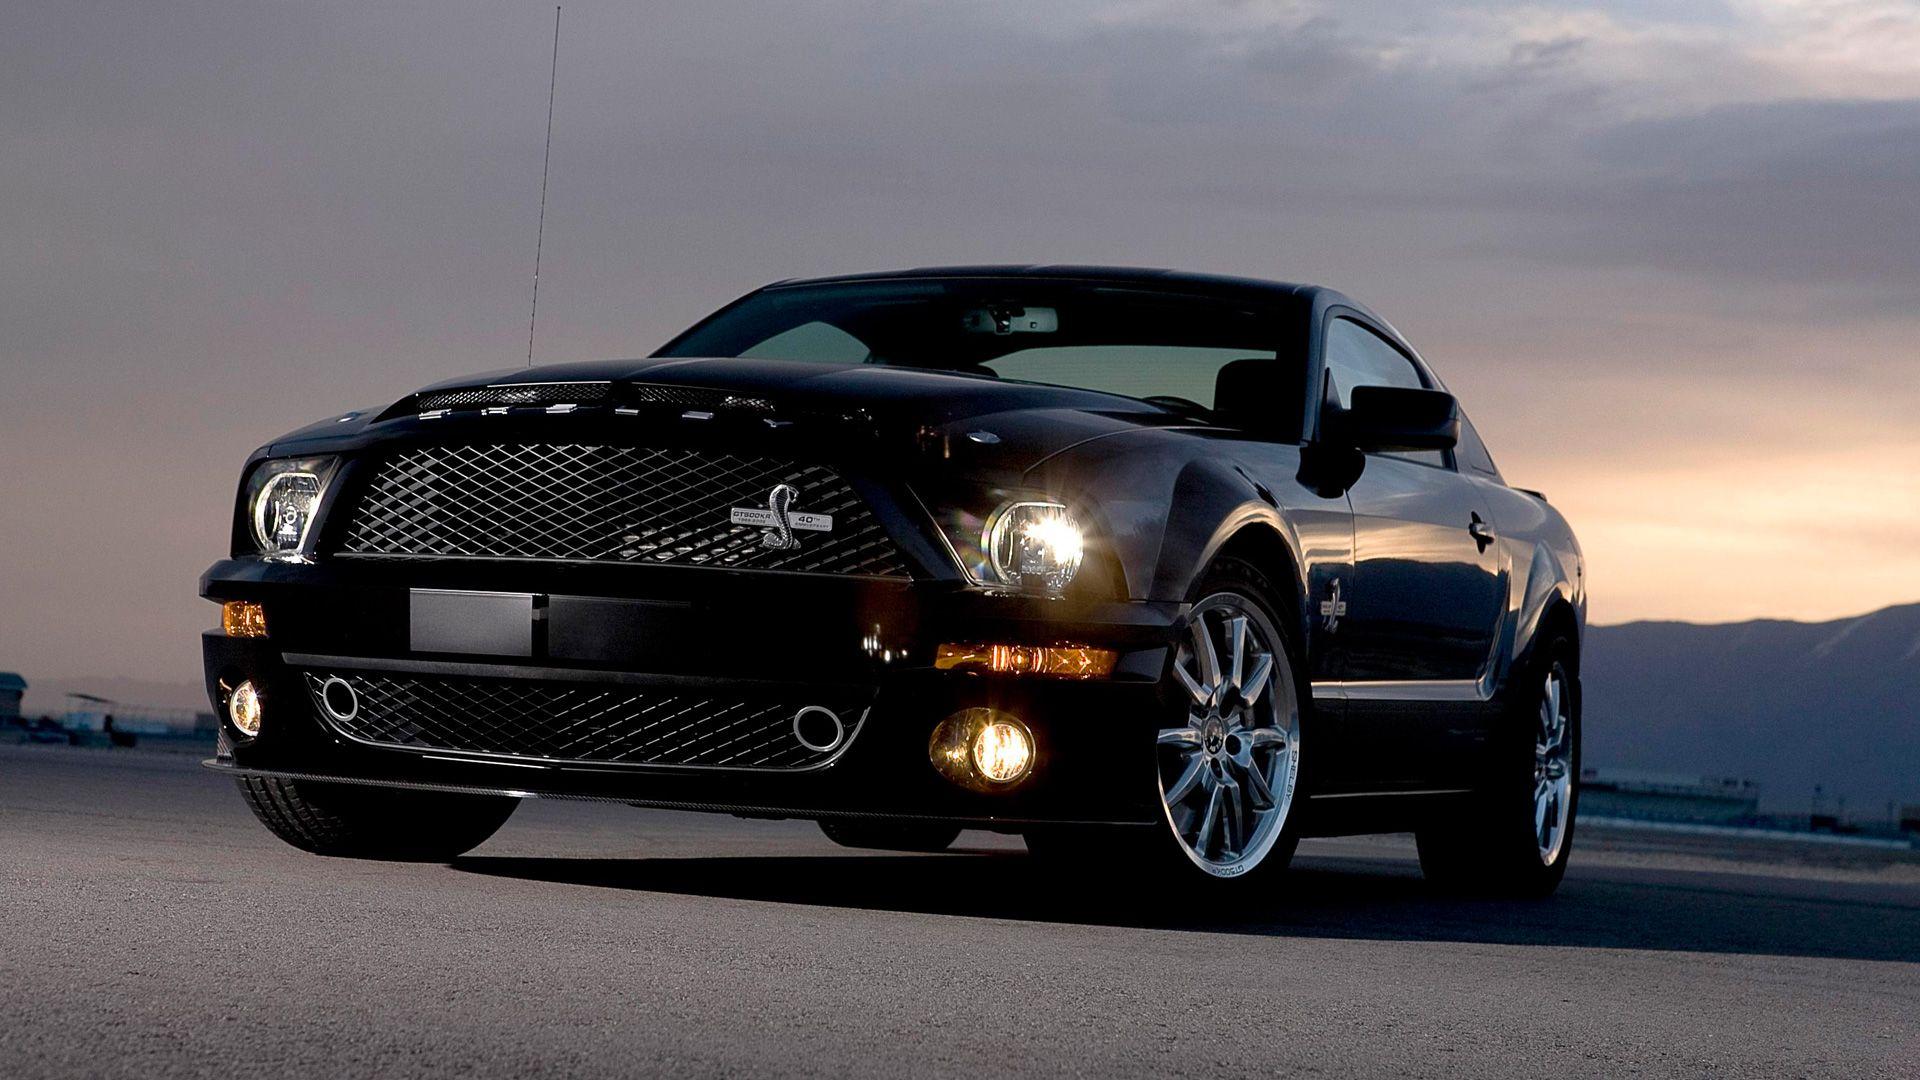 Ford Mustang Shelby Cobra GT HD Wallpaper Background. wallpaper